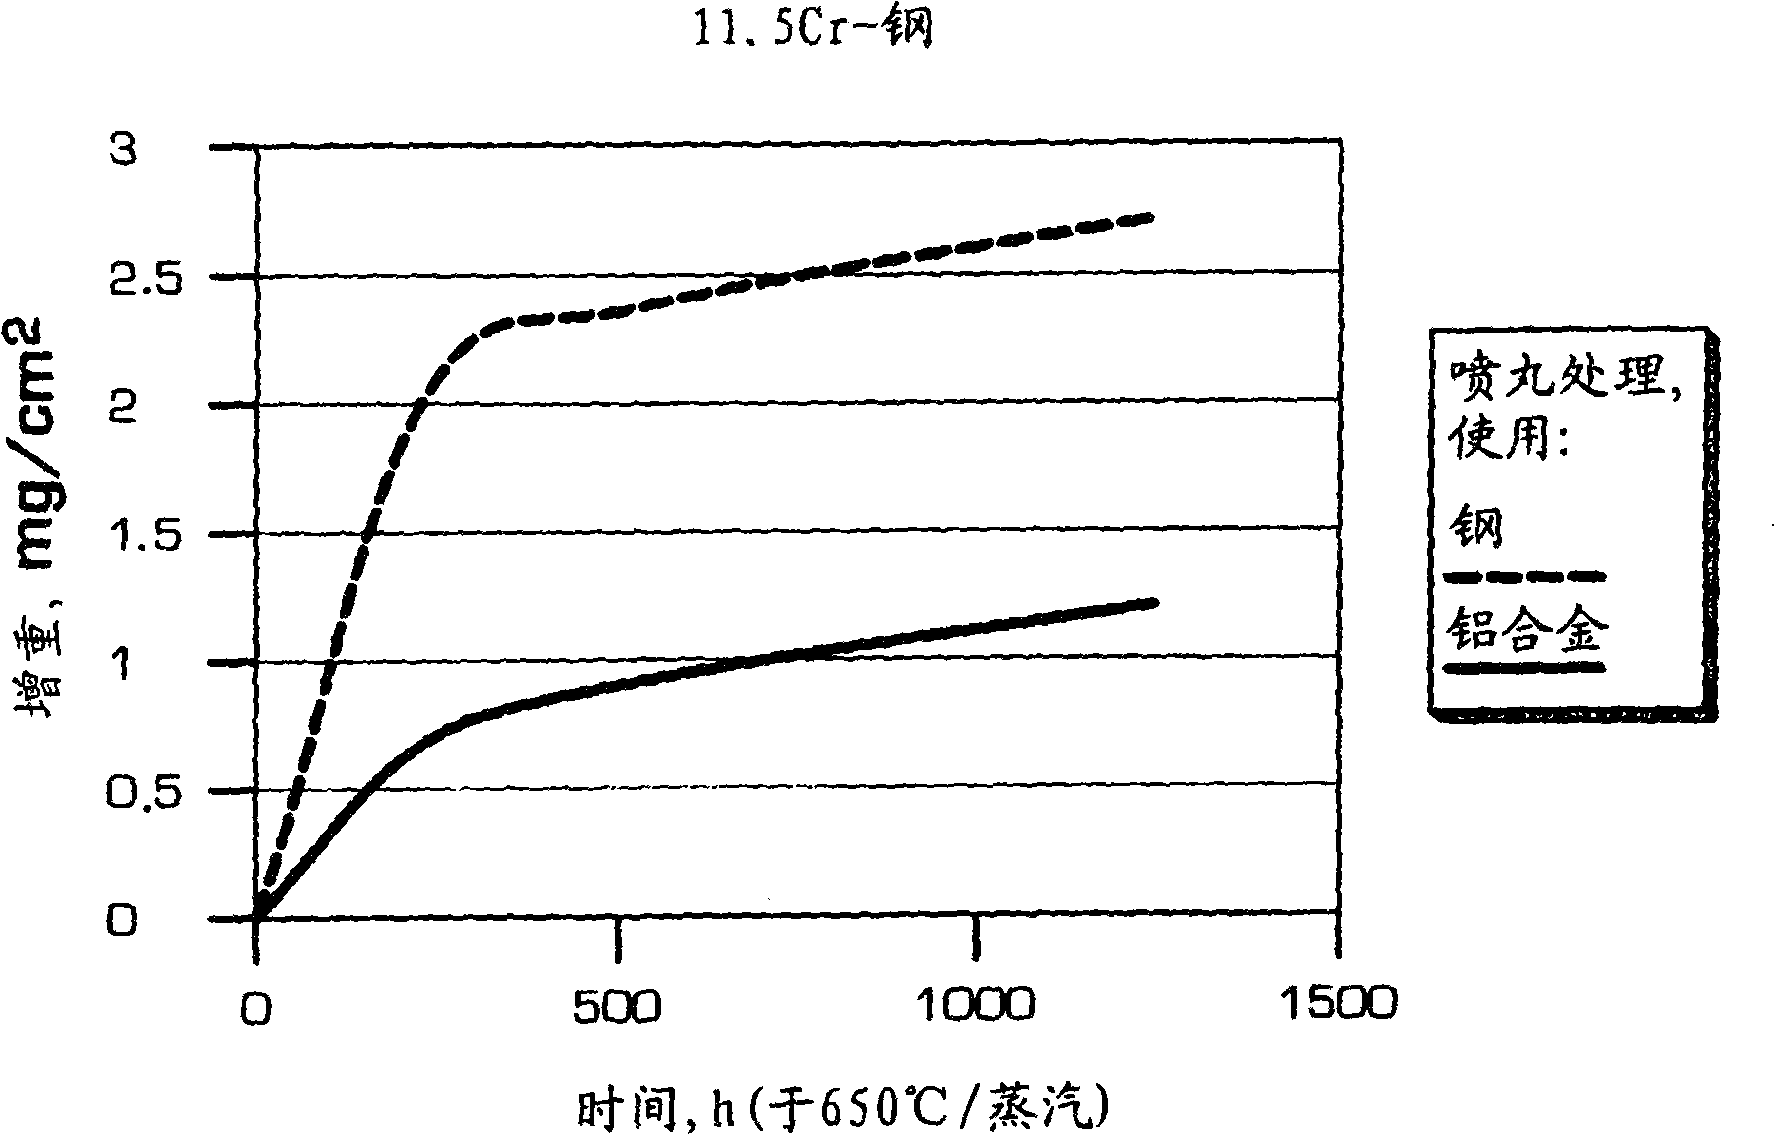 Method for surface treatment of Cr-steel